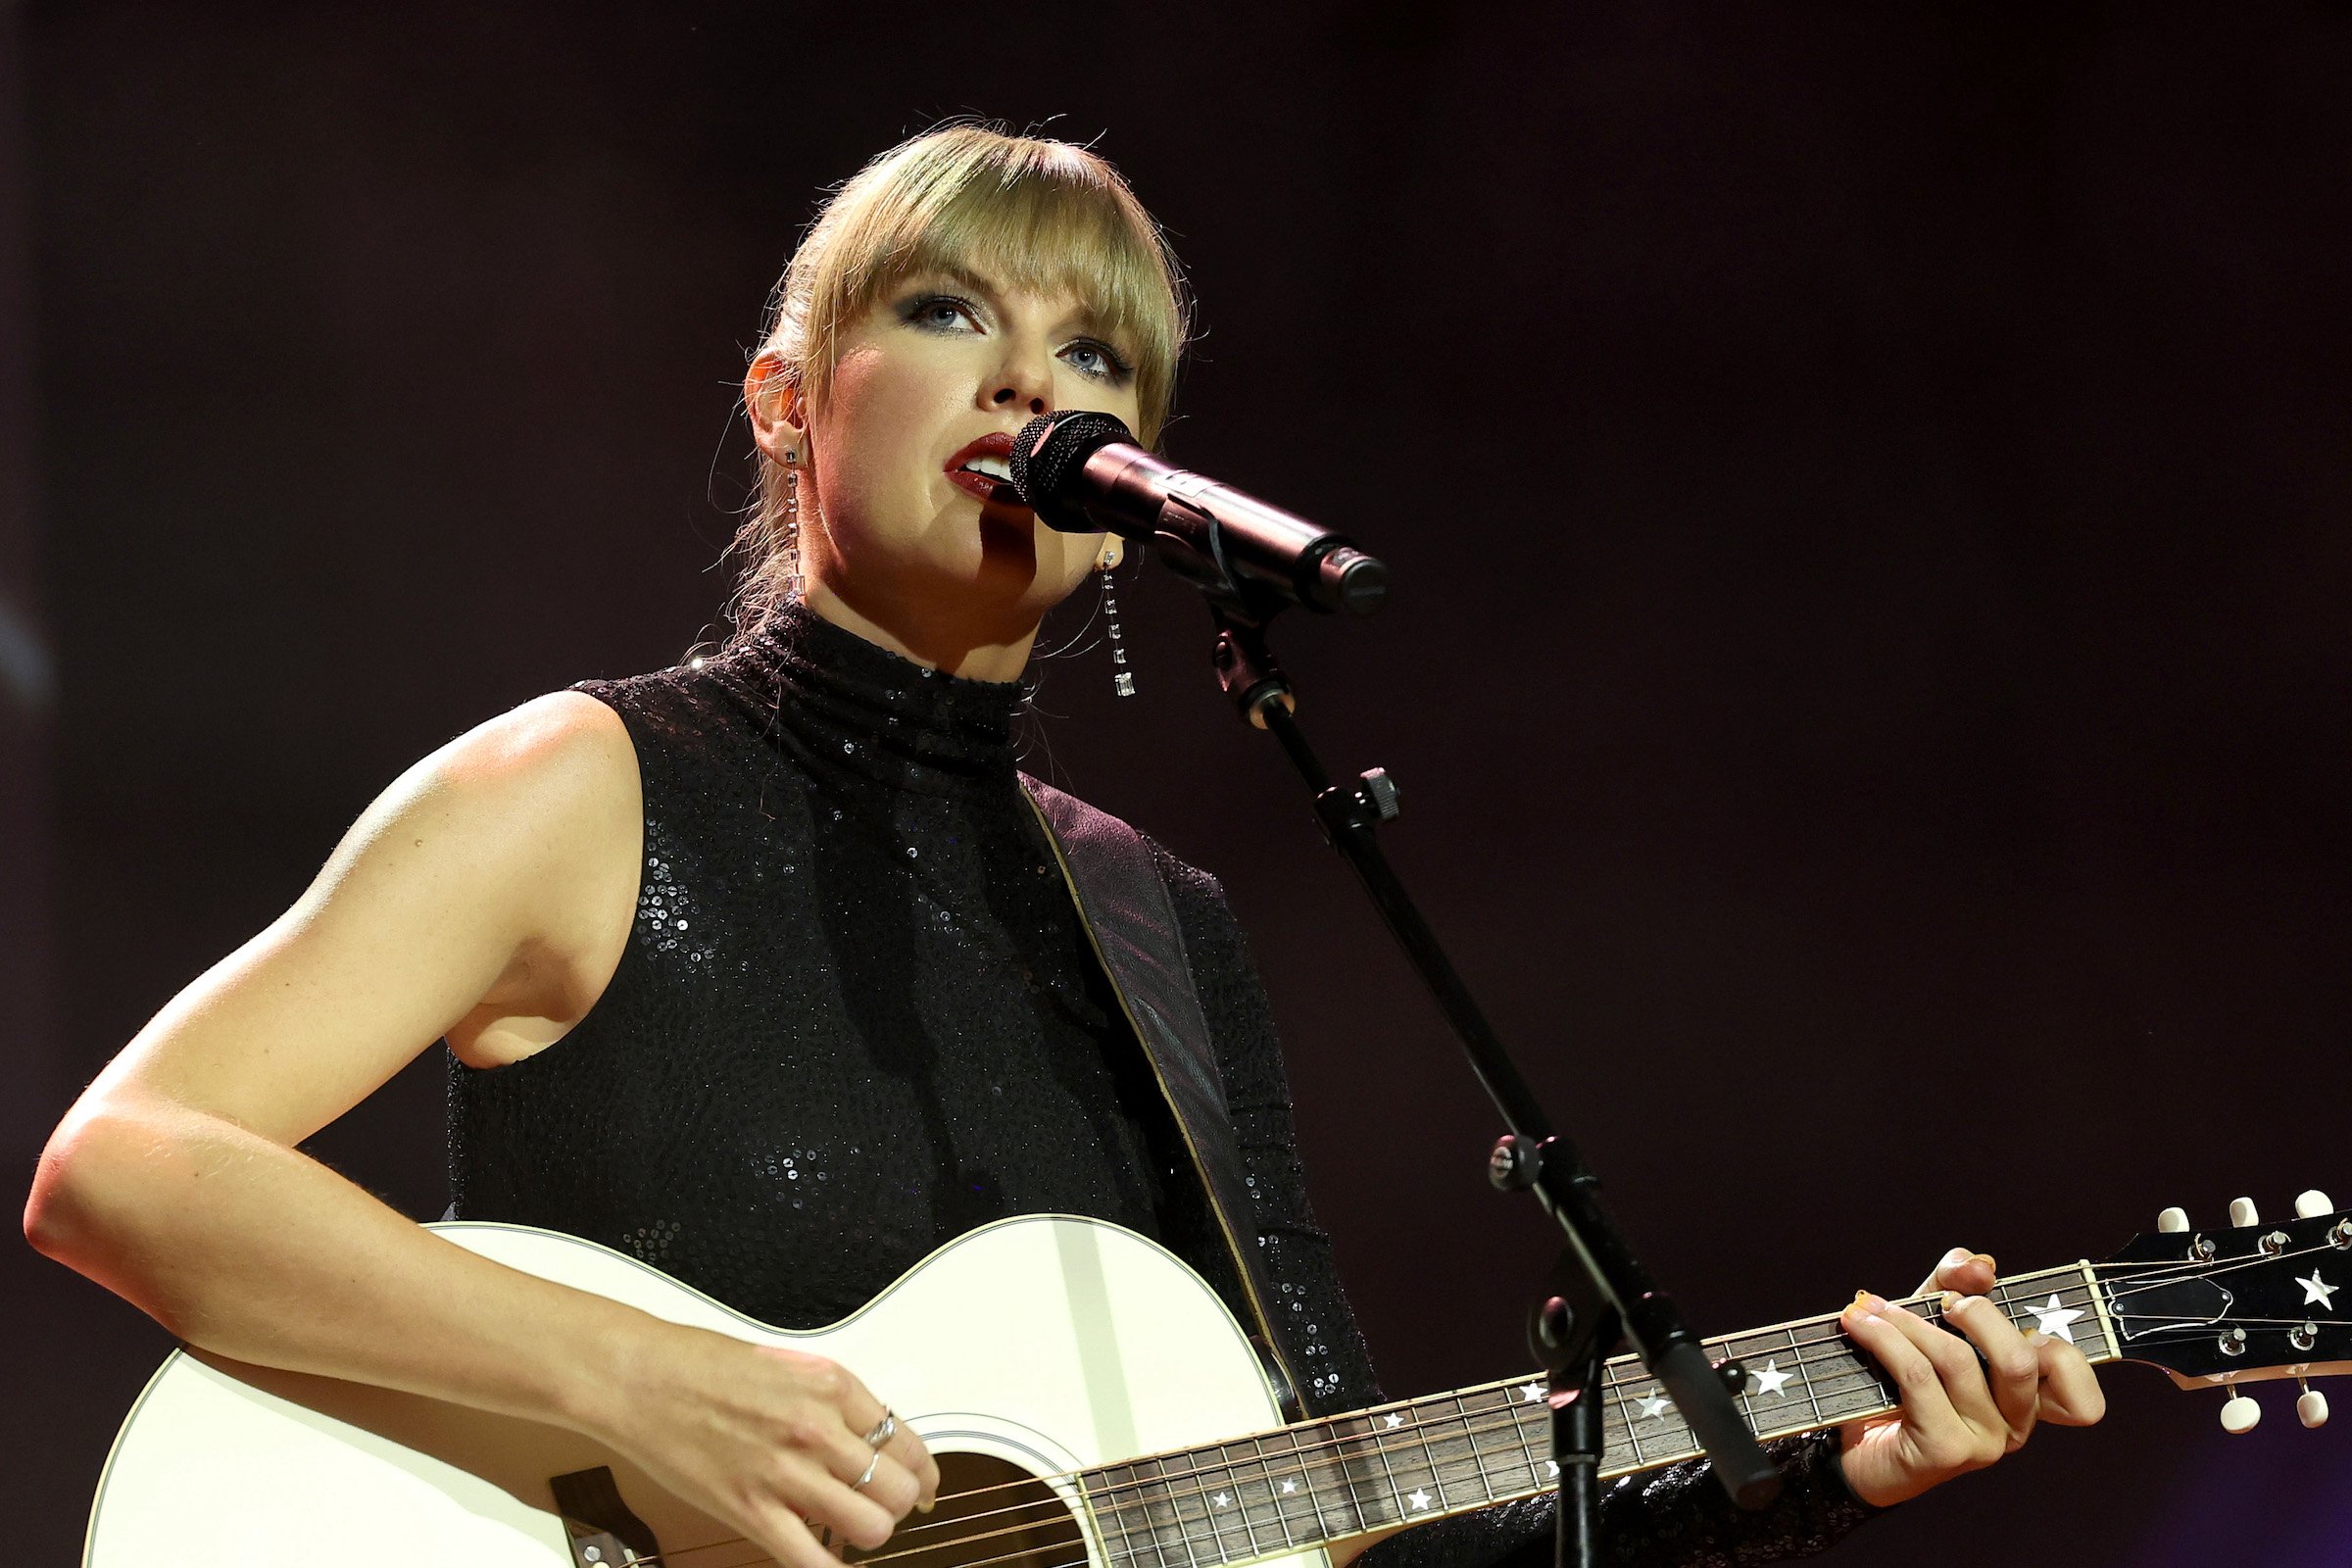 Taylor Swift, who is rumored to have a diss track against Kanye West and Kim Kardashian with Drake, playing guitar.